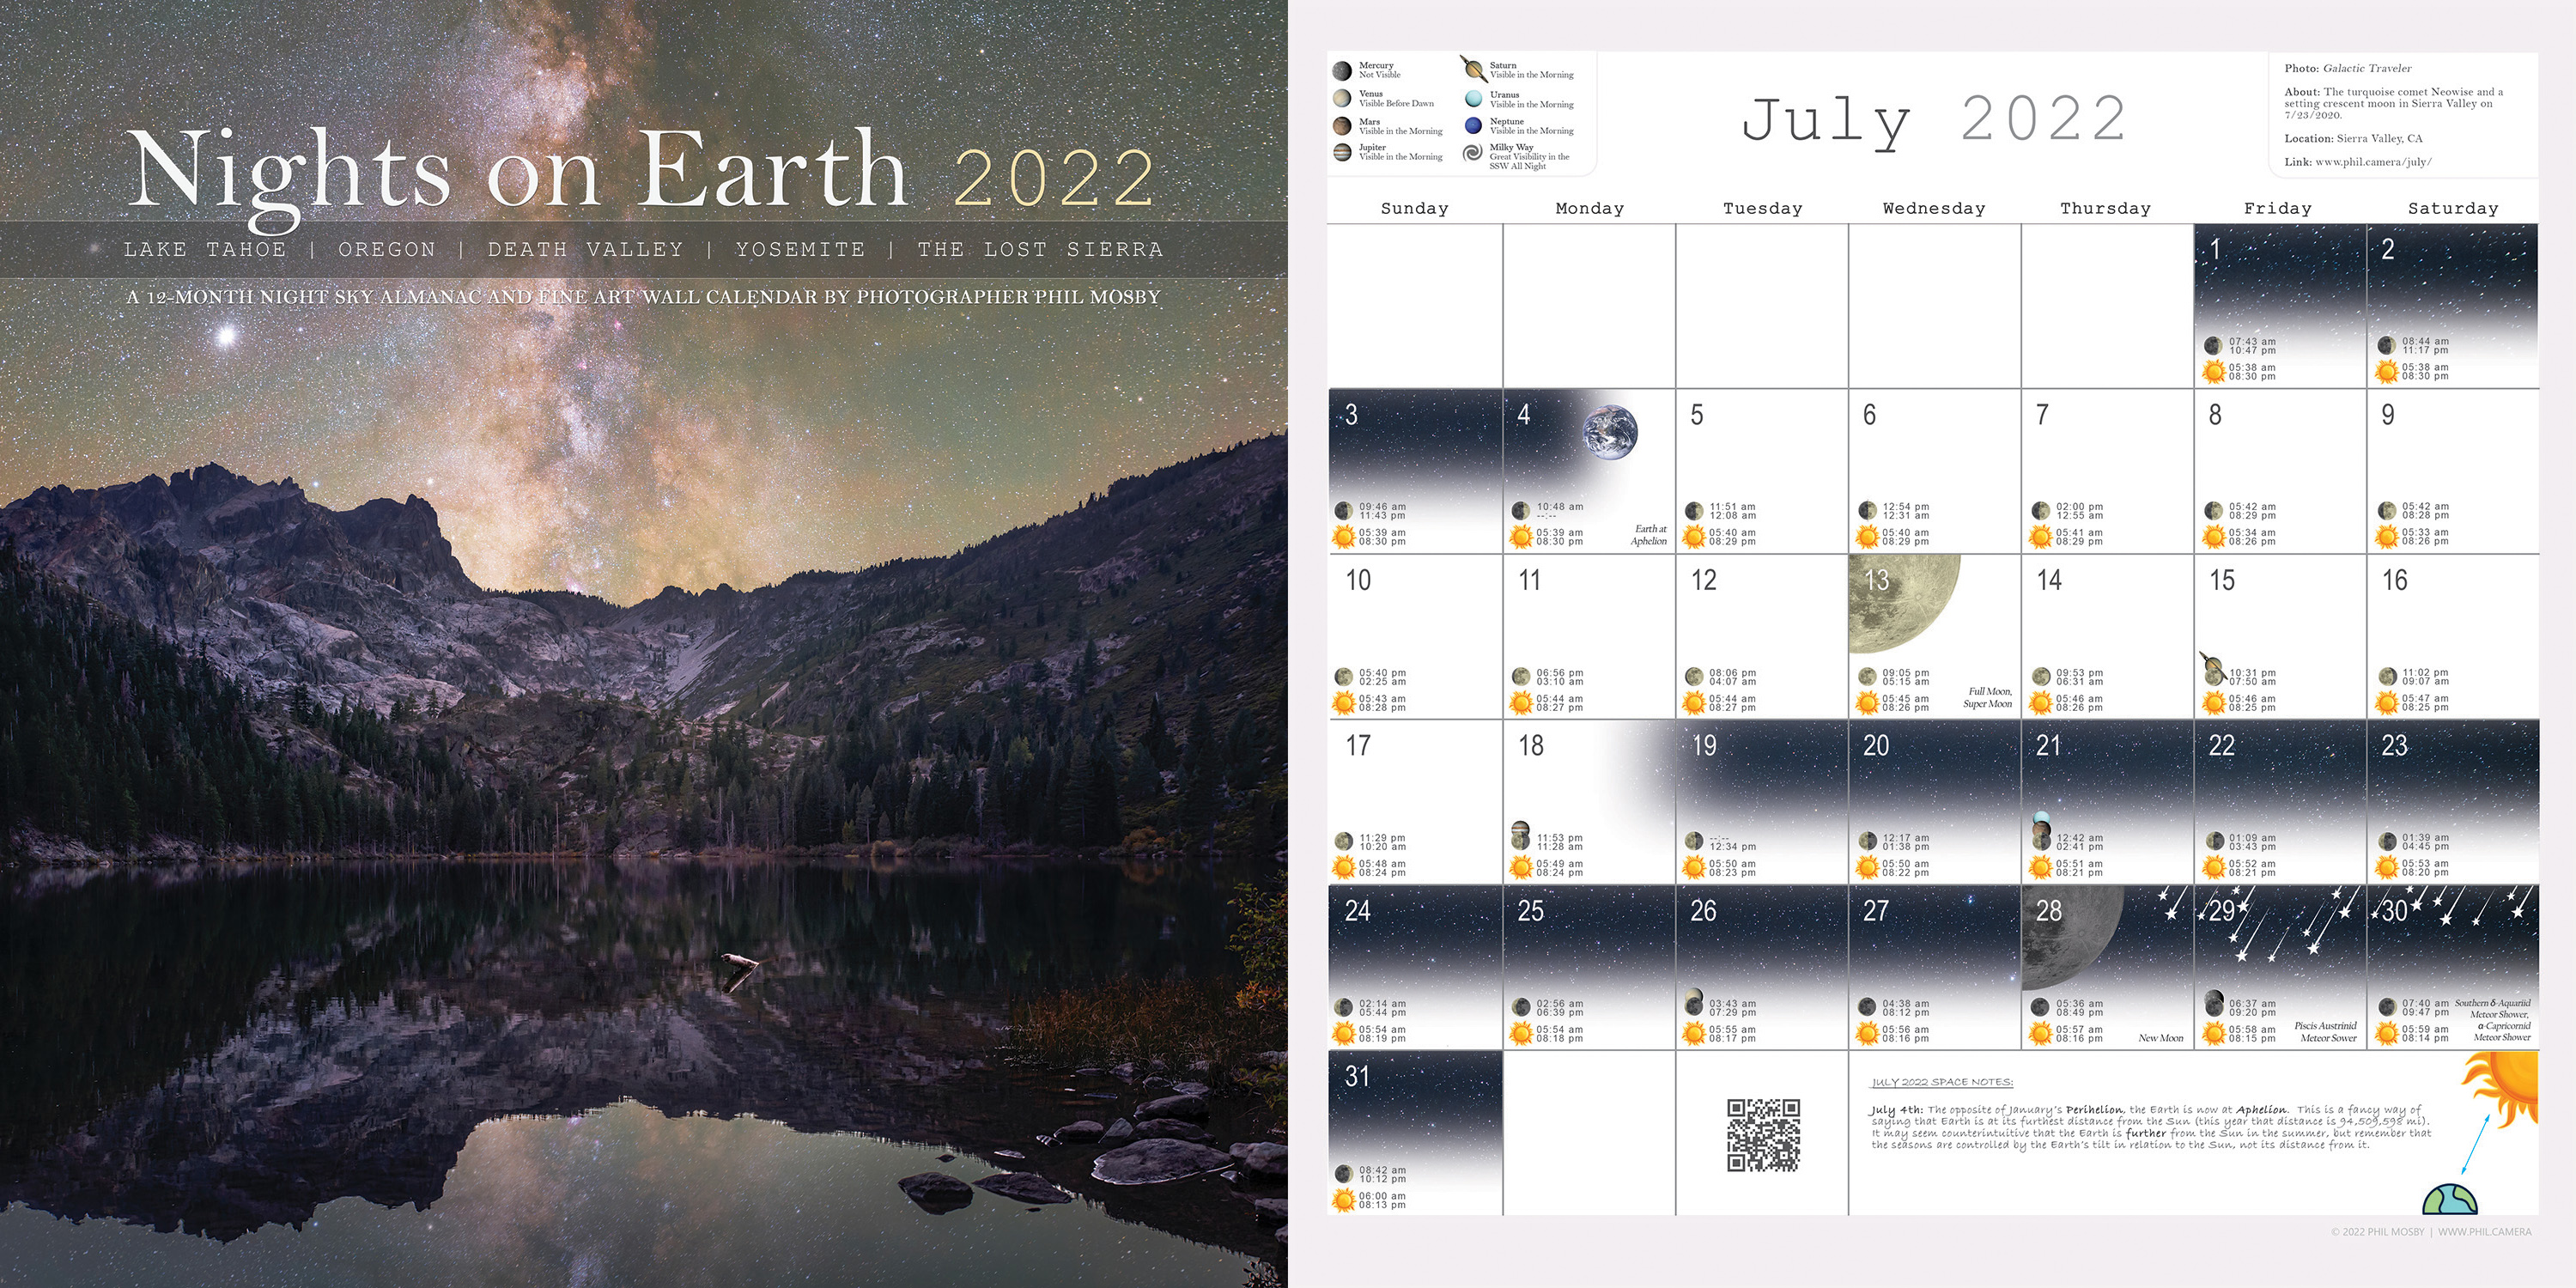 Nights on Earth 2022 Nightscape photography calendar and stargazer's